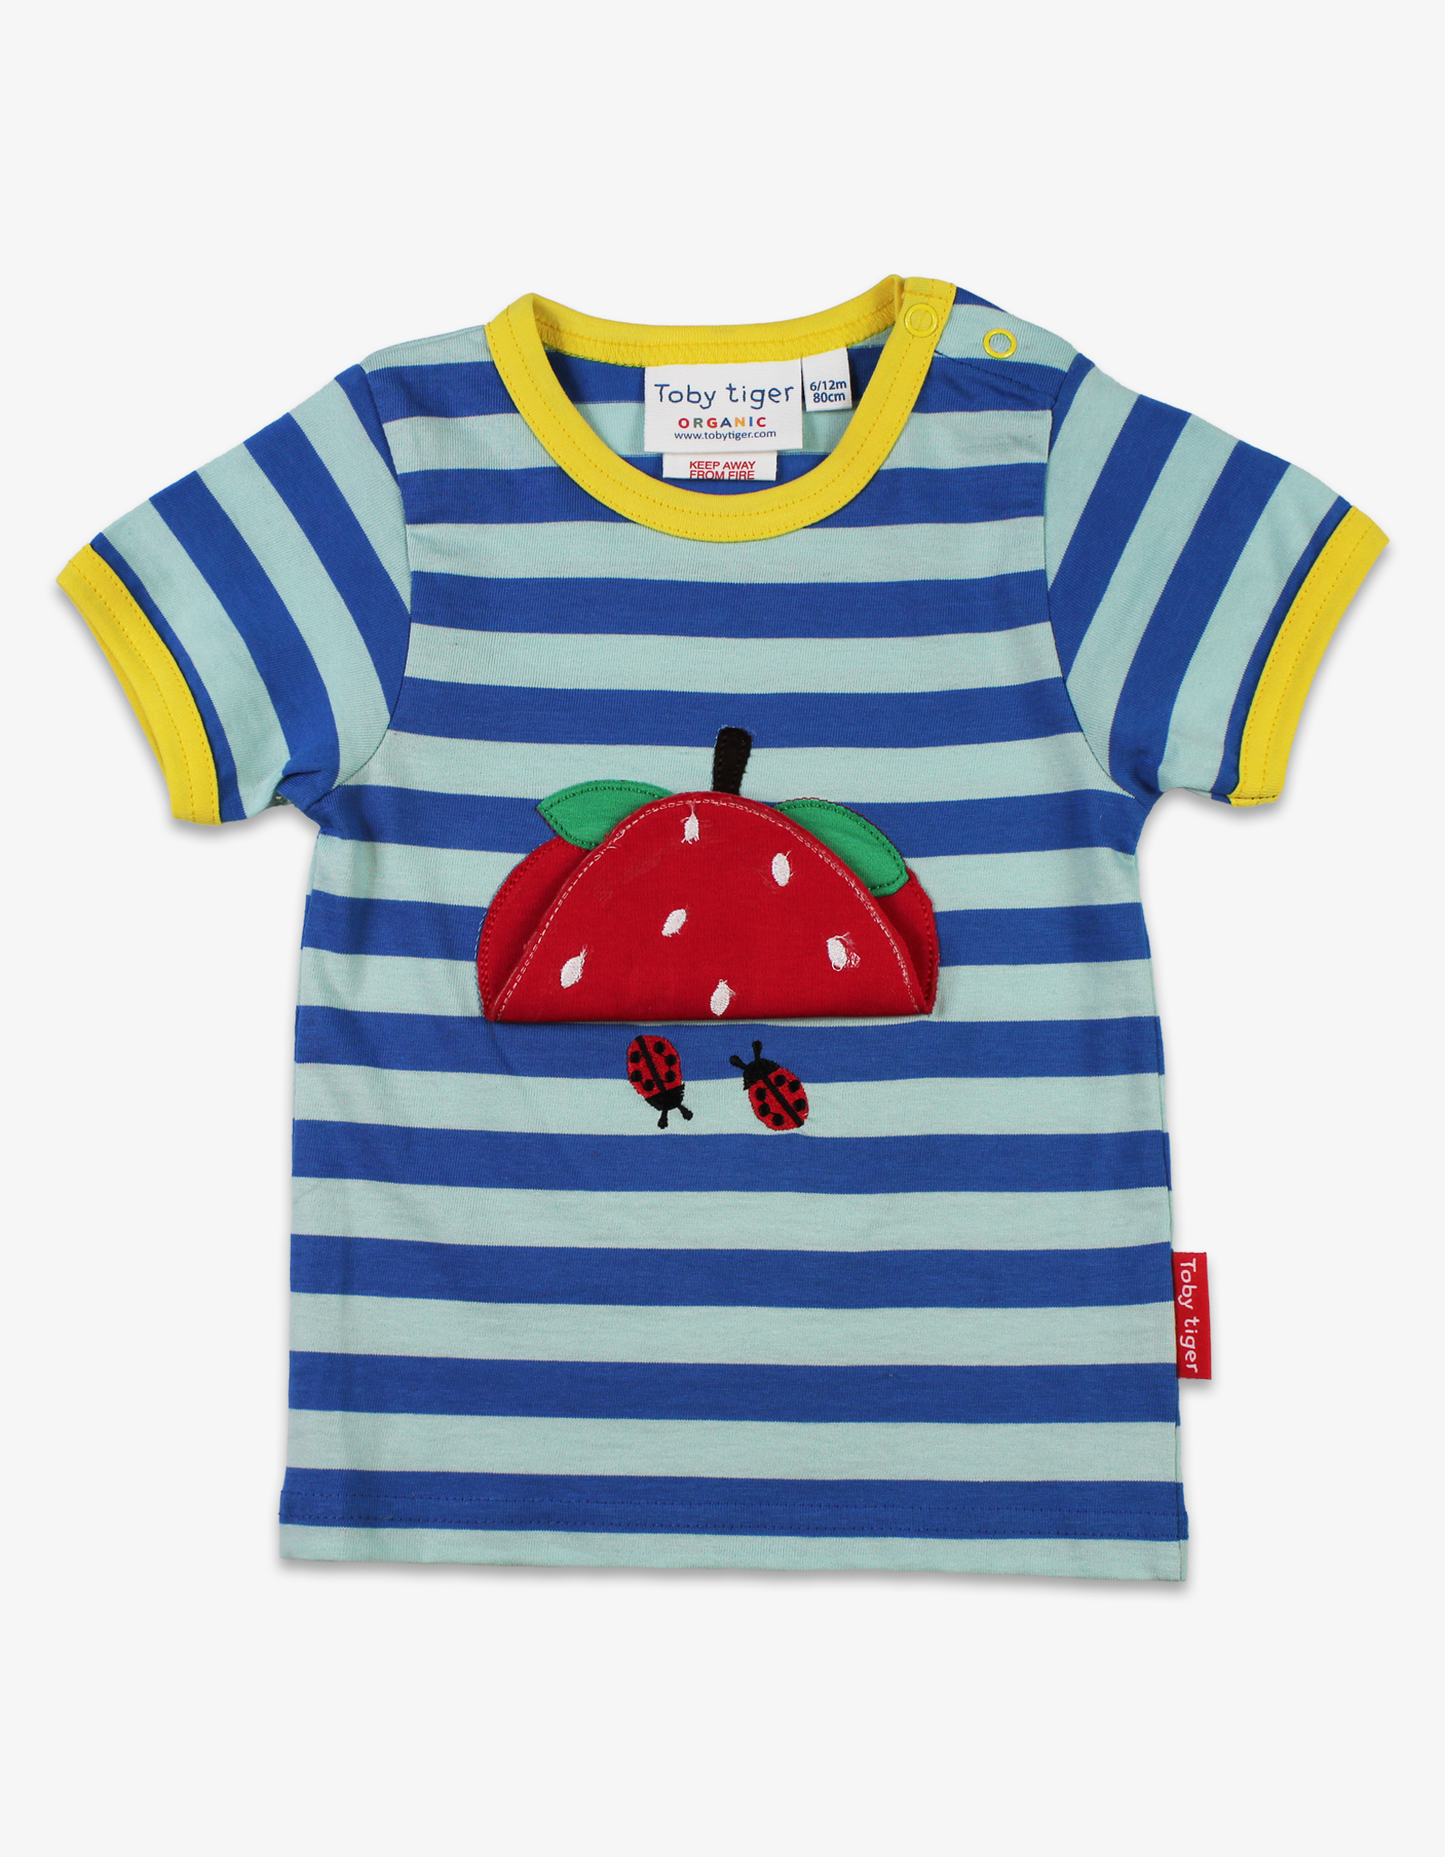 Organic cotton short-sleeved shirt with strawberry appliqué